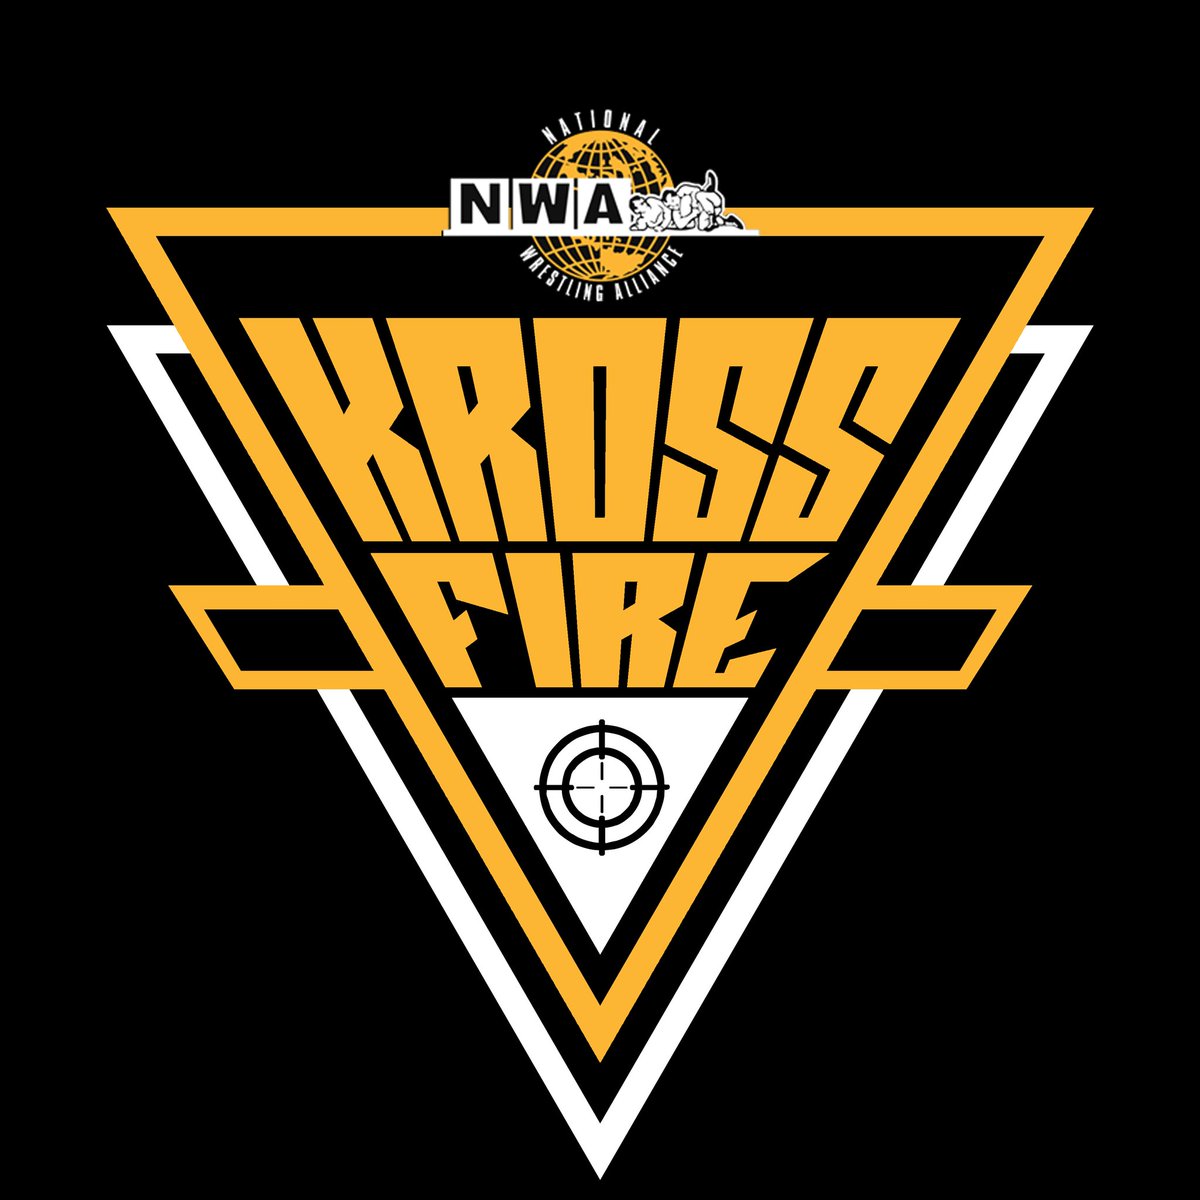 Tonight @nwa Owner @Billy made us a Official Territory!!!! NWA Kross Fire!!!! From here in Out everything we do is to Represent the 3 Most Prestigious letters in Wrestling N.W.A. Sincerely @KenziePaige_1 @kyliealexxa 🙏🙏